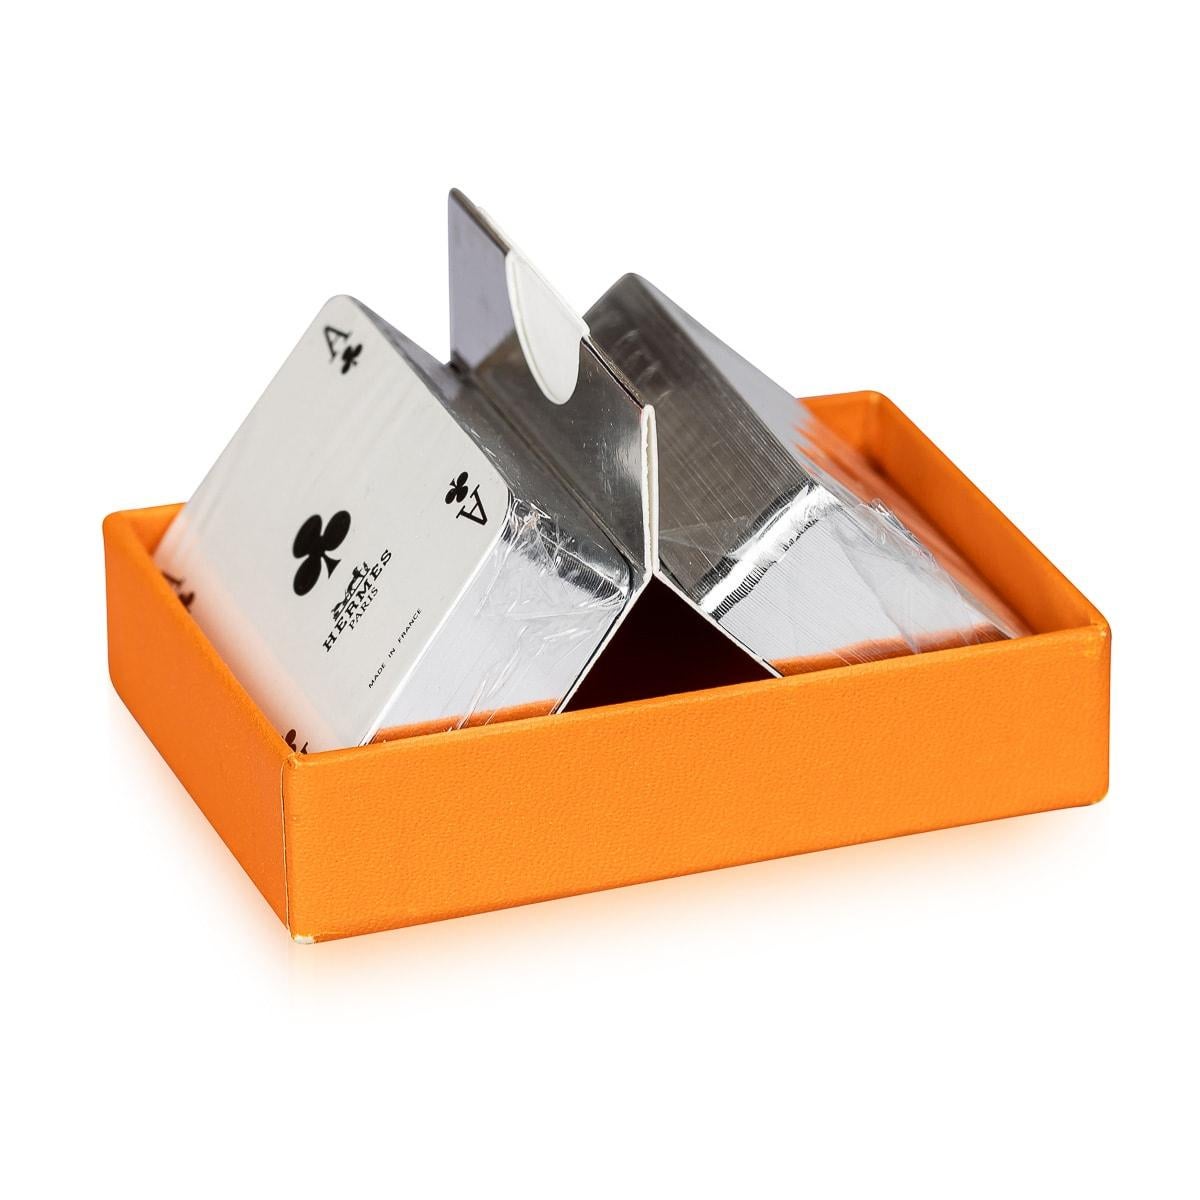 Vintage set of 2 Hermes silver edged playing cards, accented with silver edges. Adorned with the iconic Hermes 